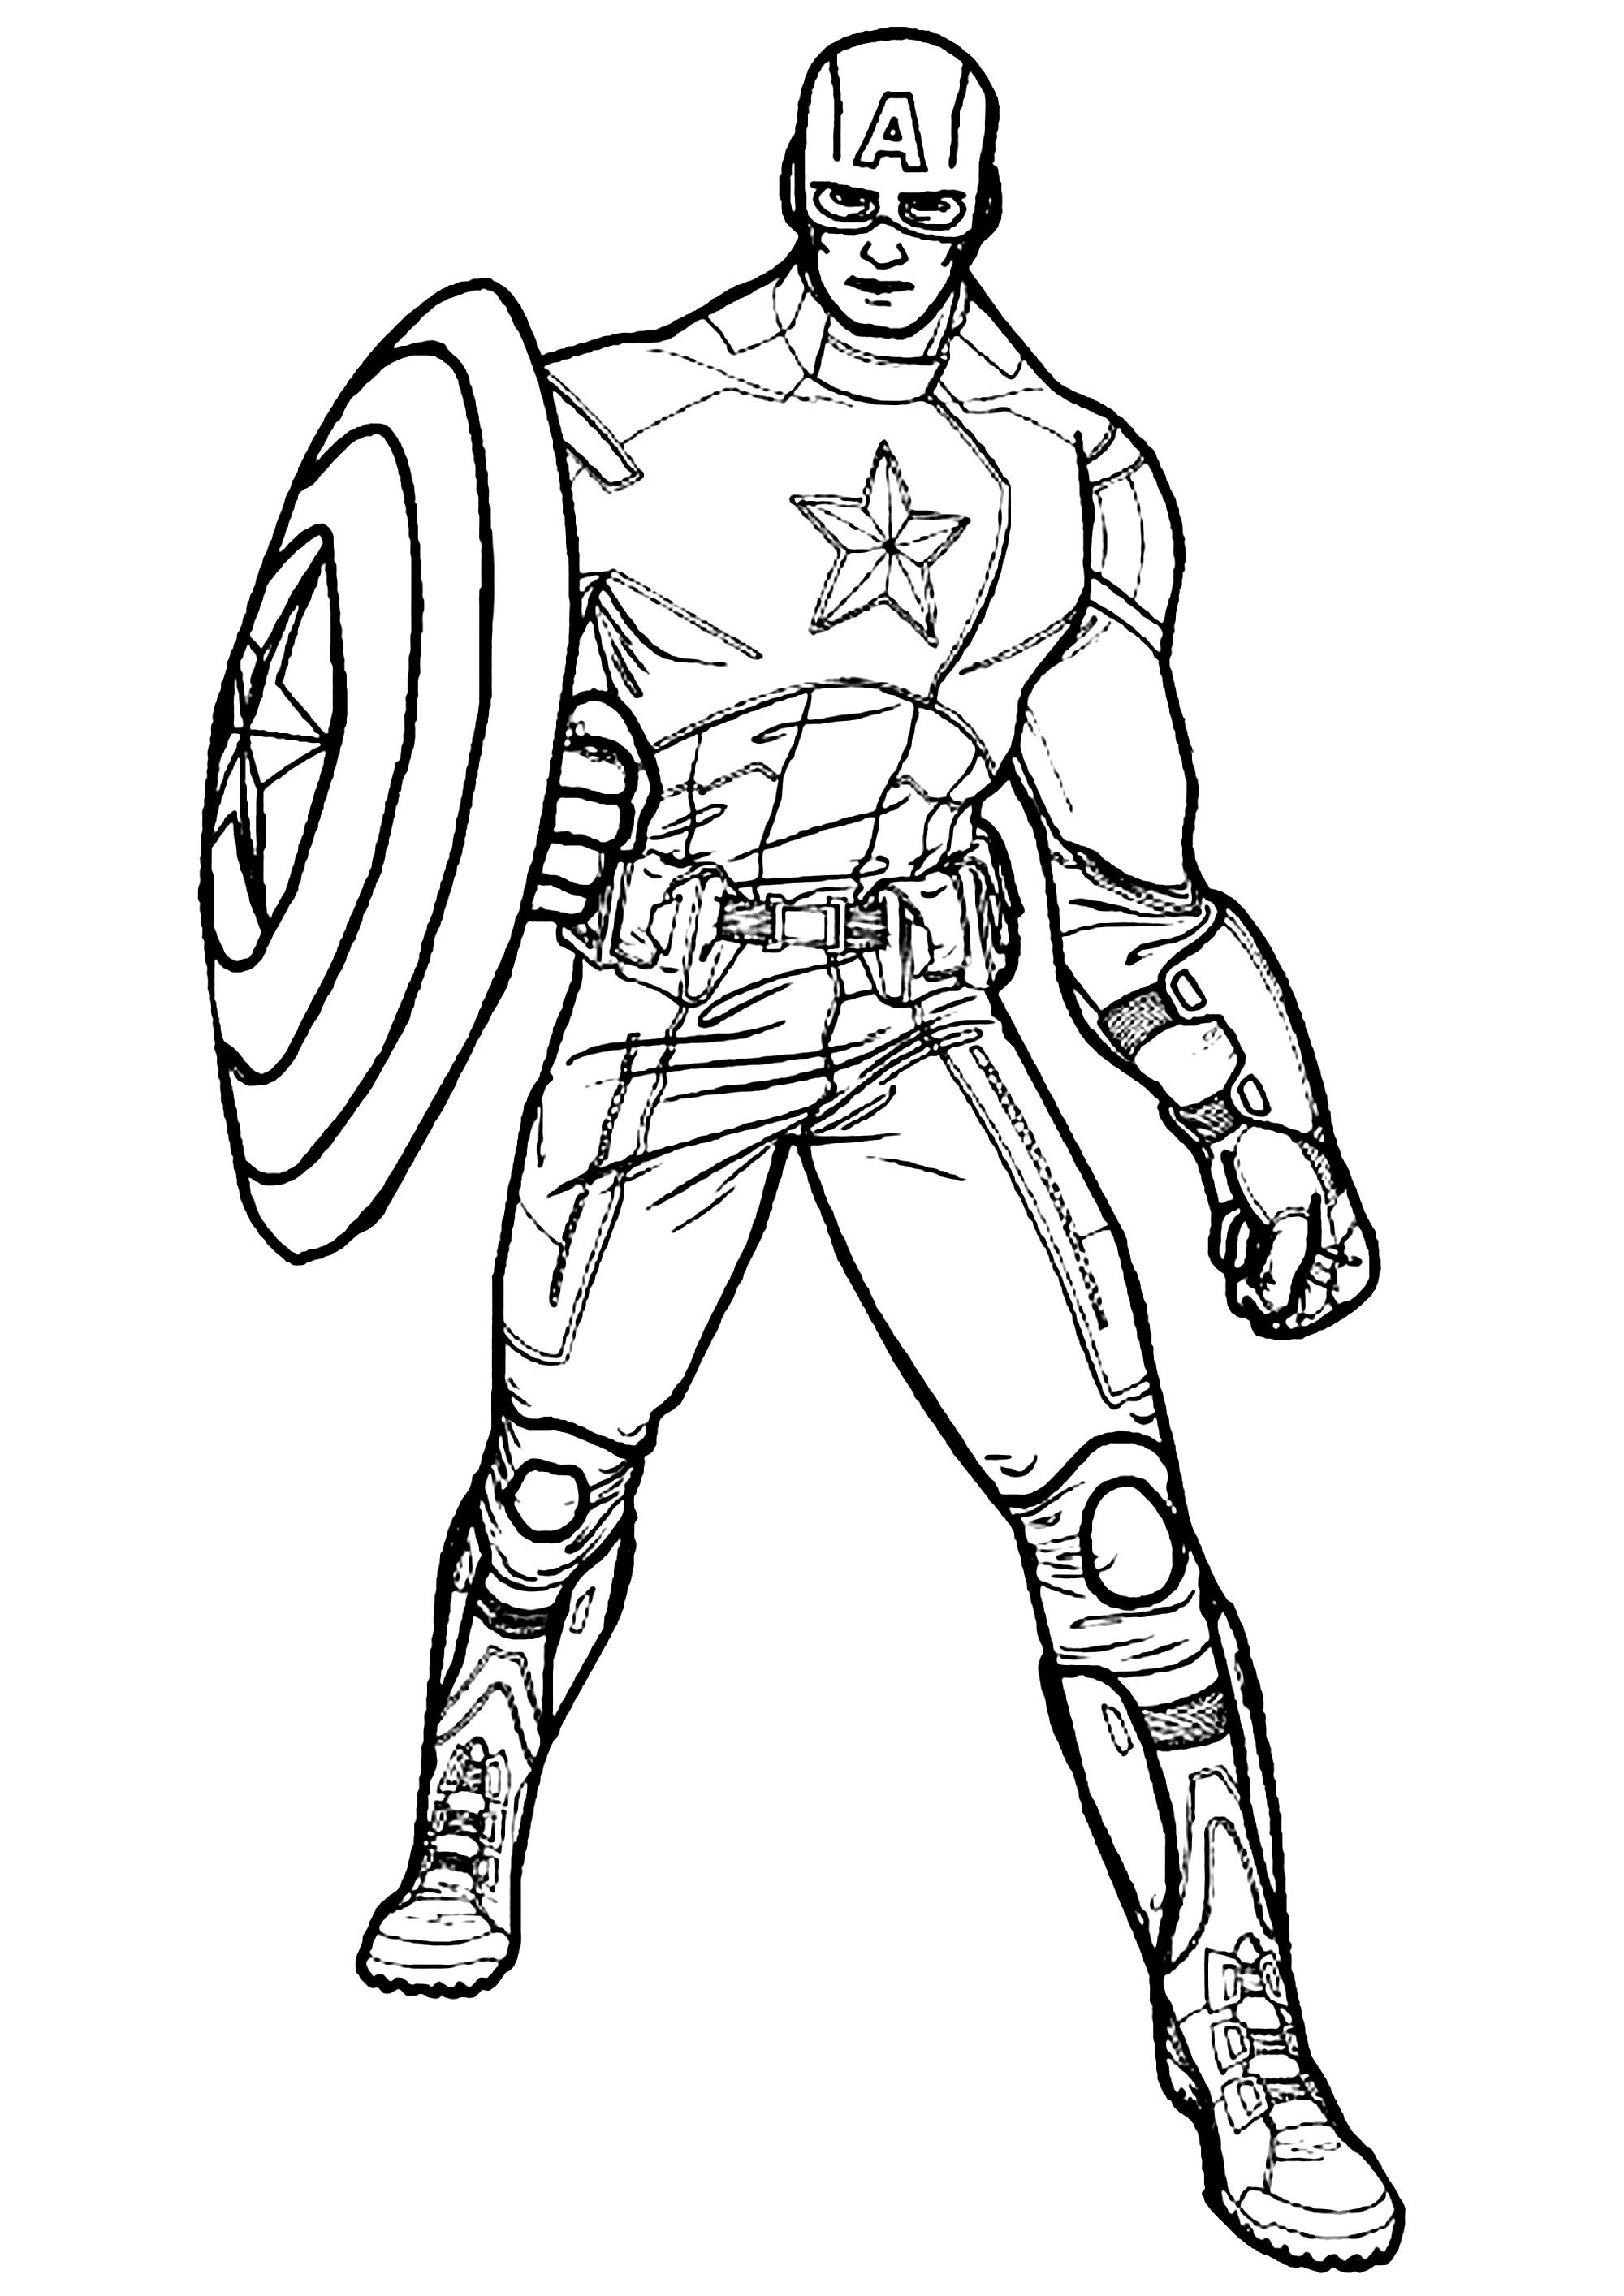 captain-america-captain-america-kids-coloring-pages